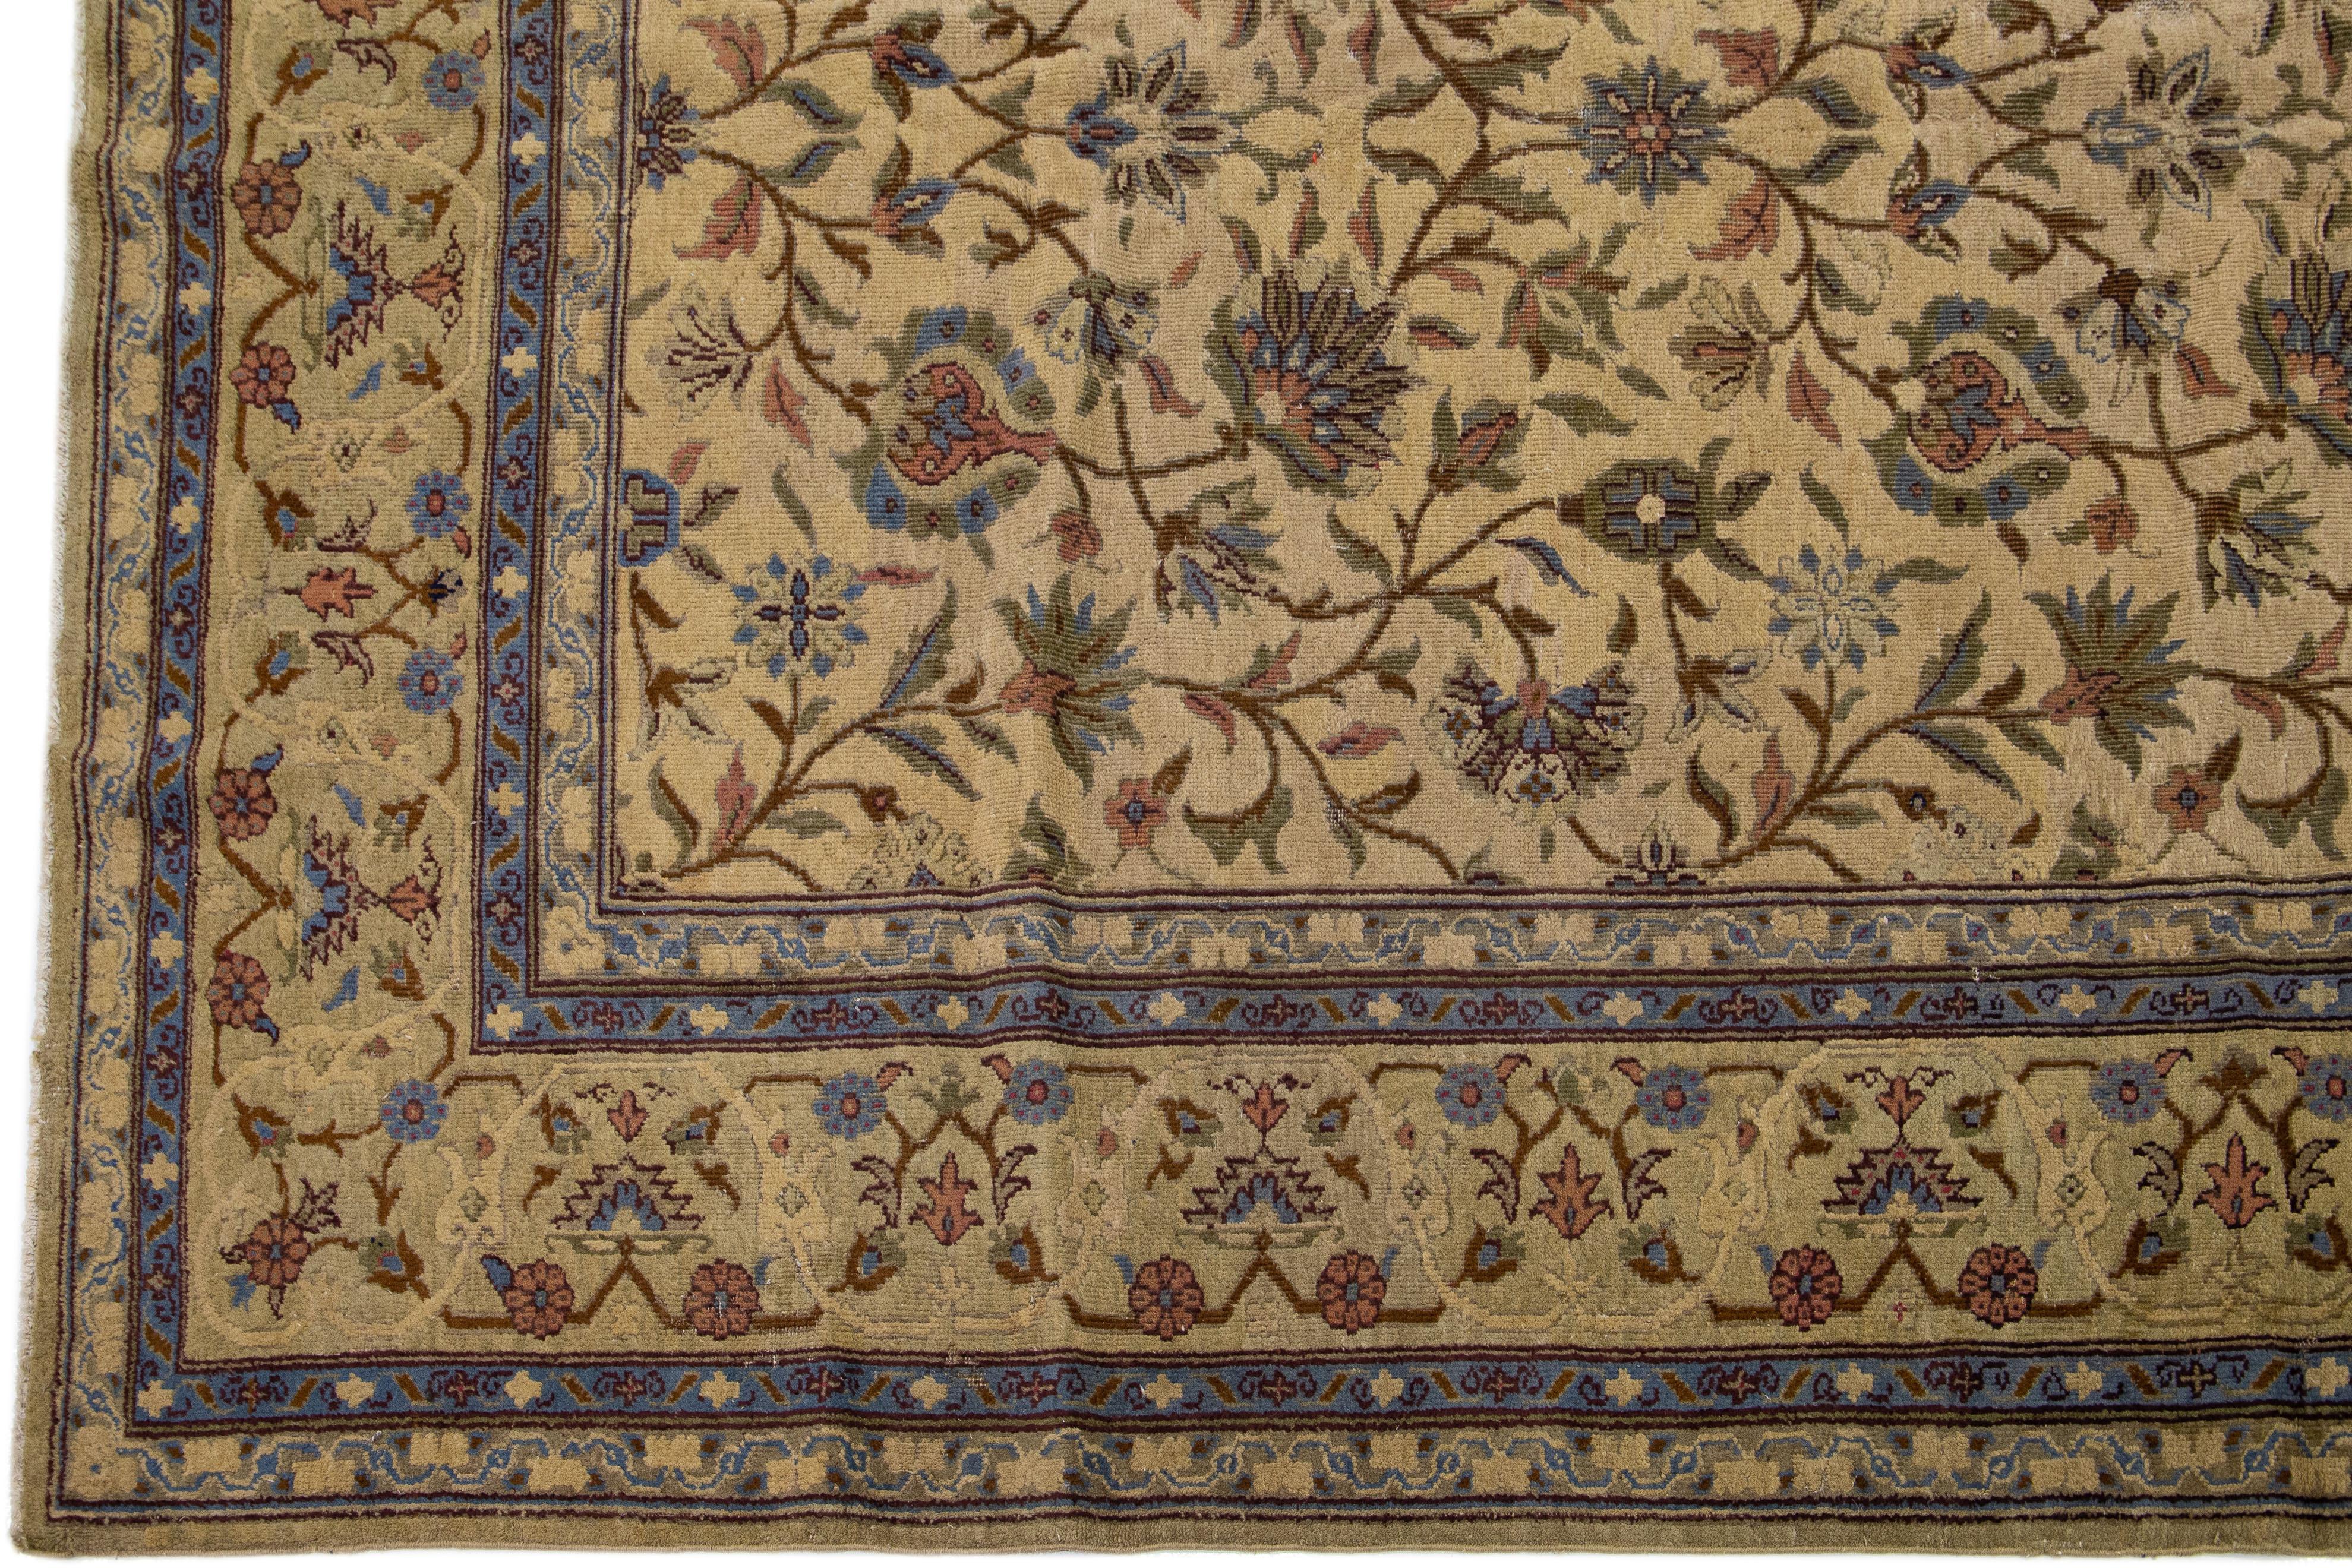 Handmade Vintage Khotan Wool Rug Brown with Allover Floral Design In Excellent Condition For Sale In Norwalk, CT